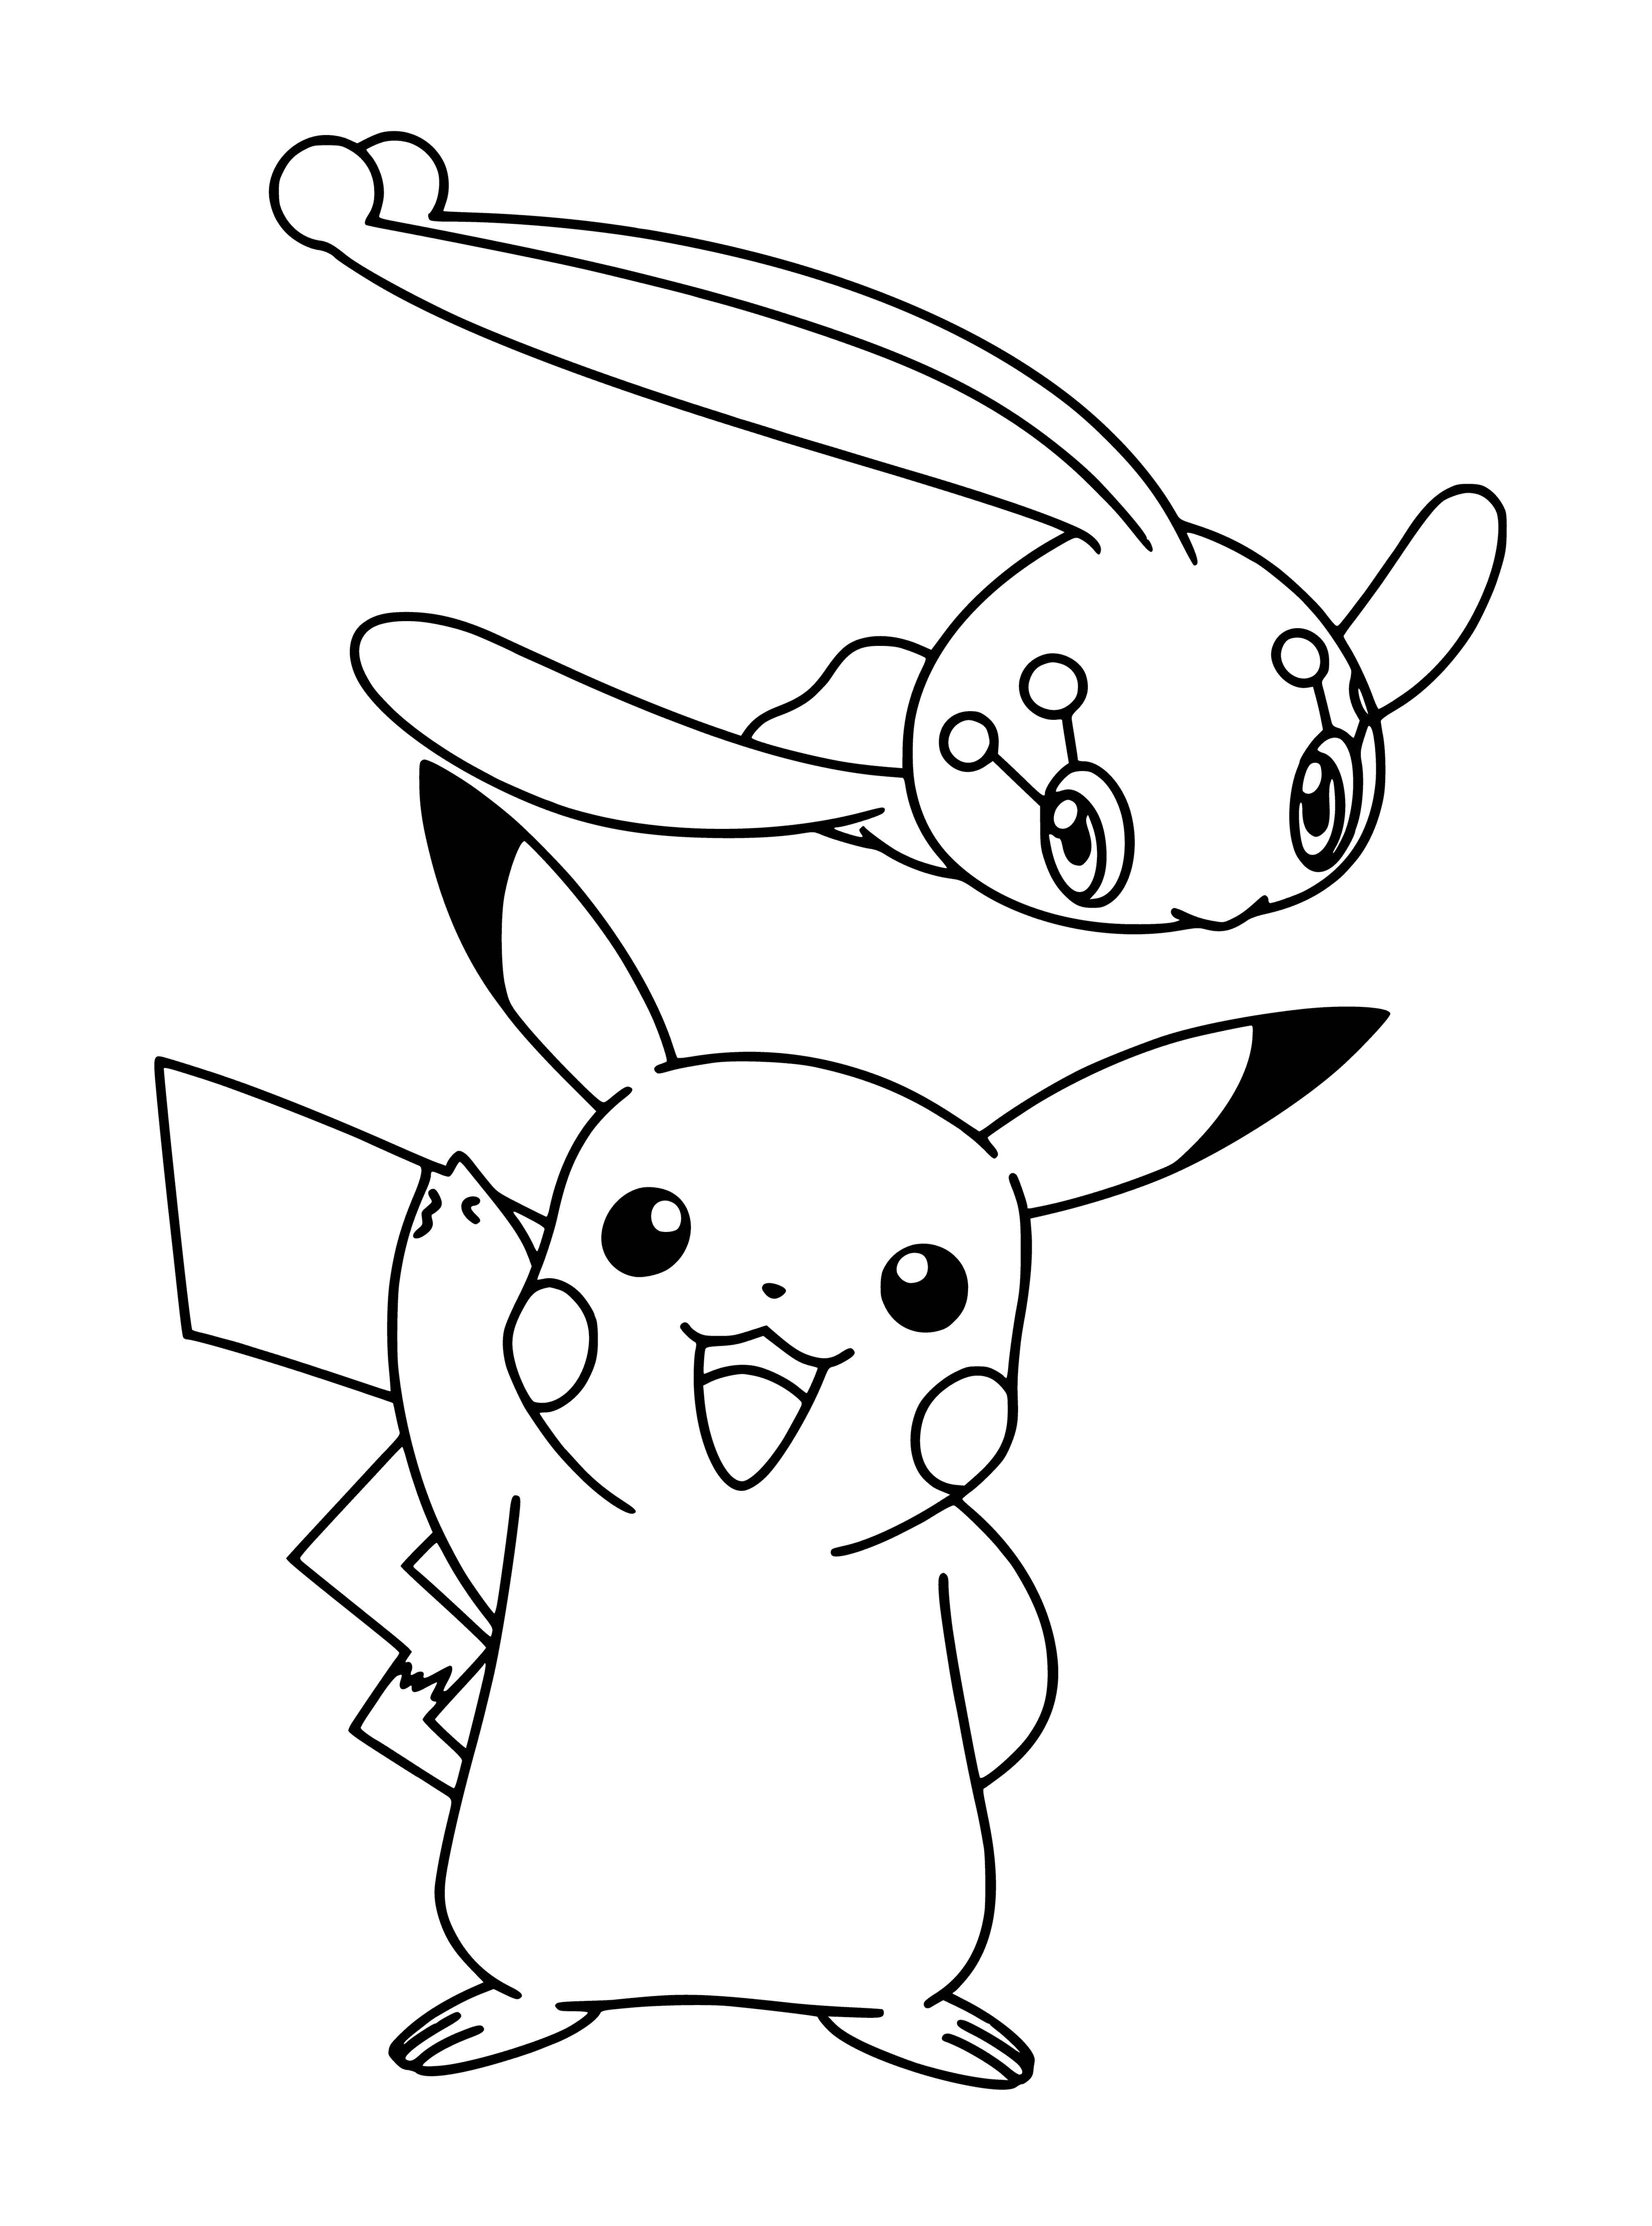 coloring page: Small yellow Pokemon w/ red electricity and black stripe down back. Pointed ears, short tail. #Pikachu